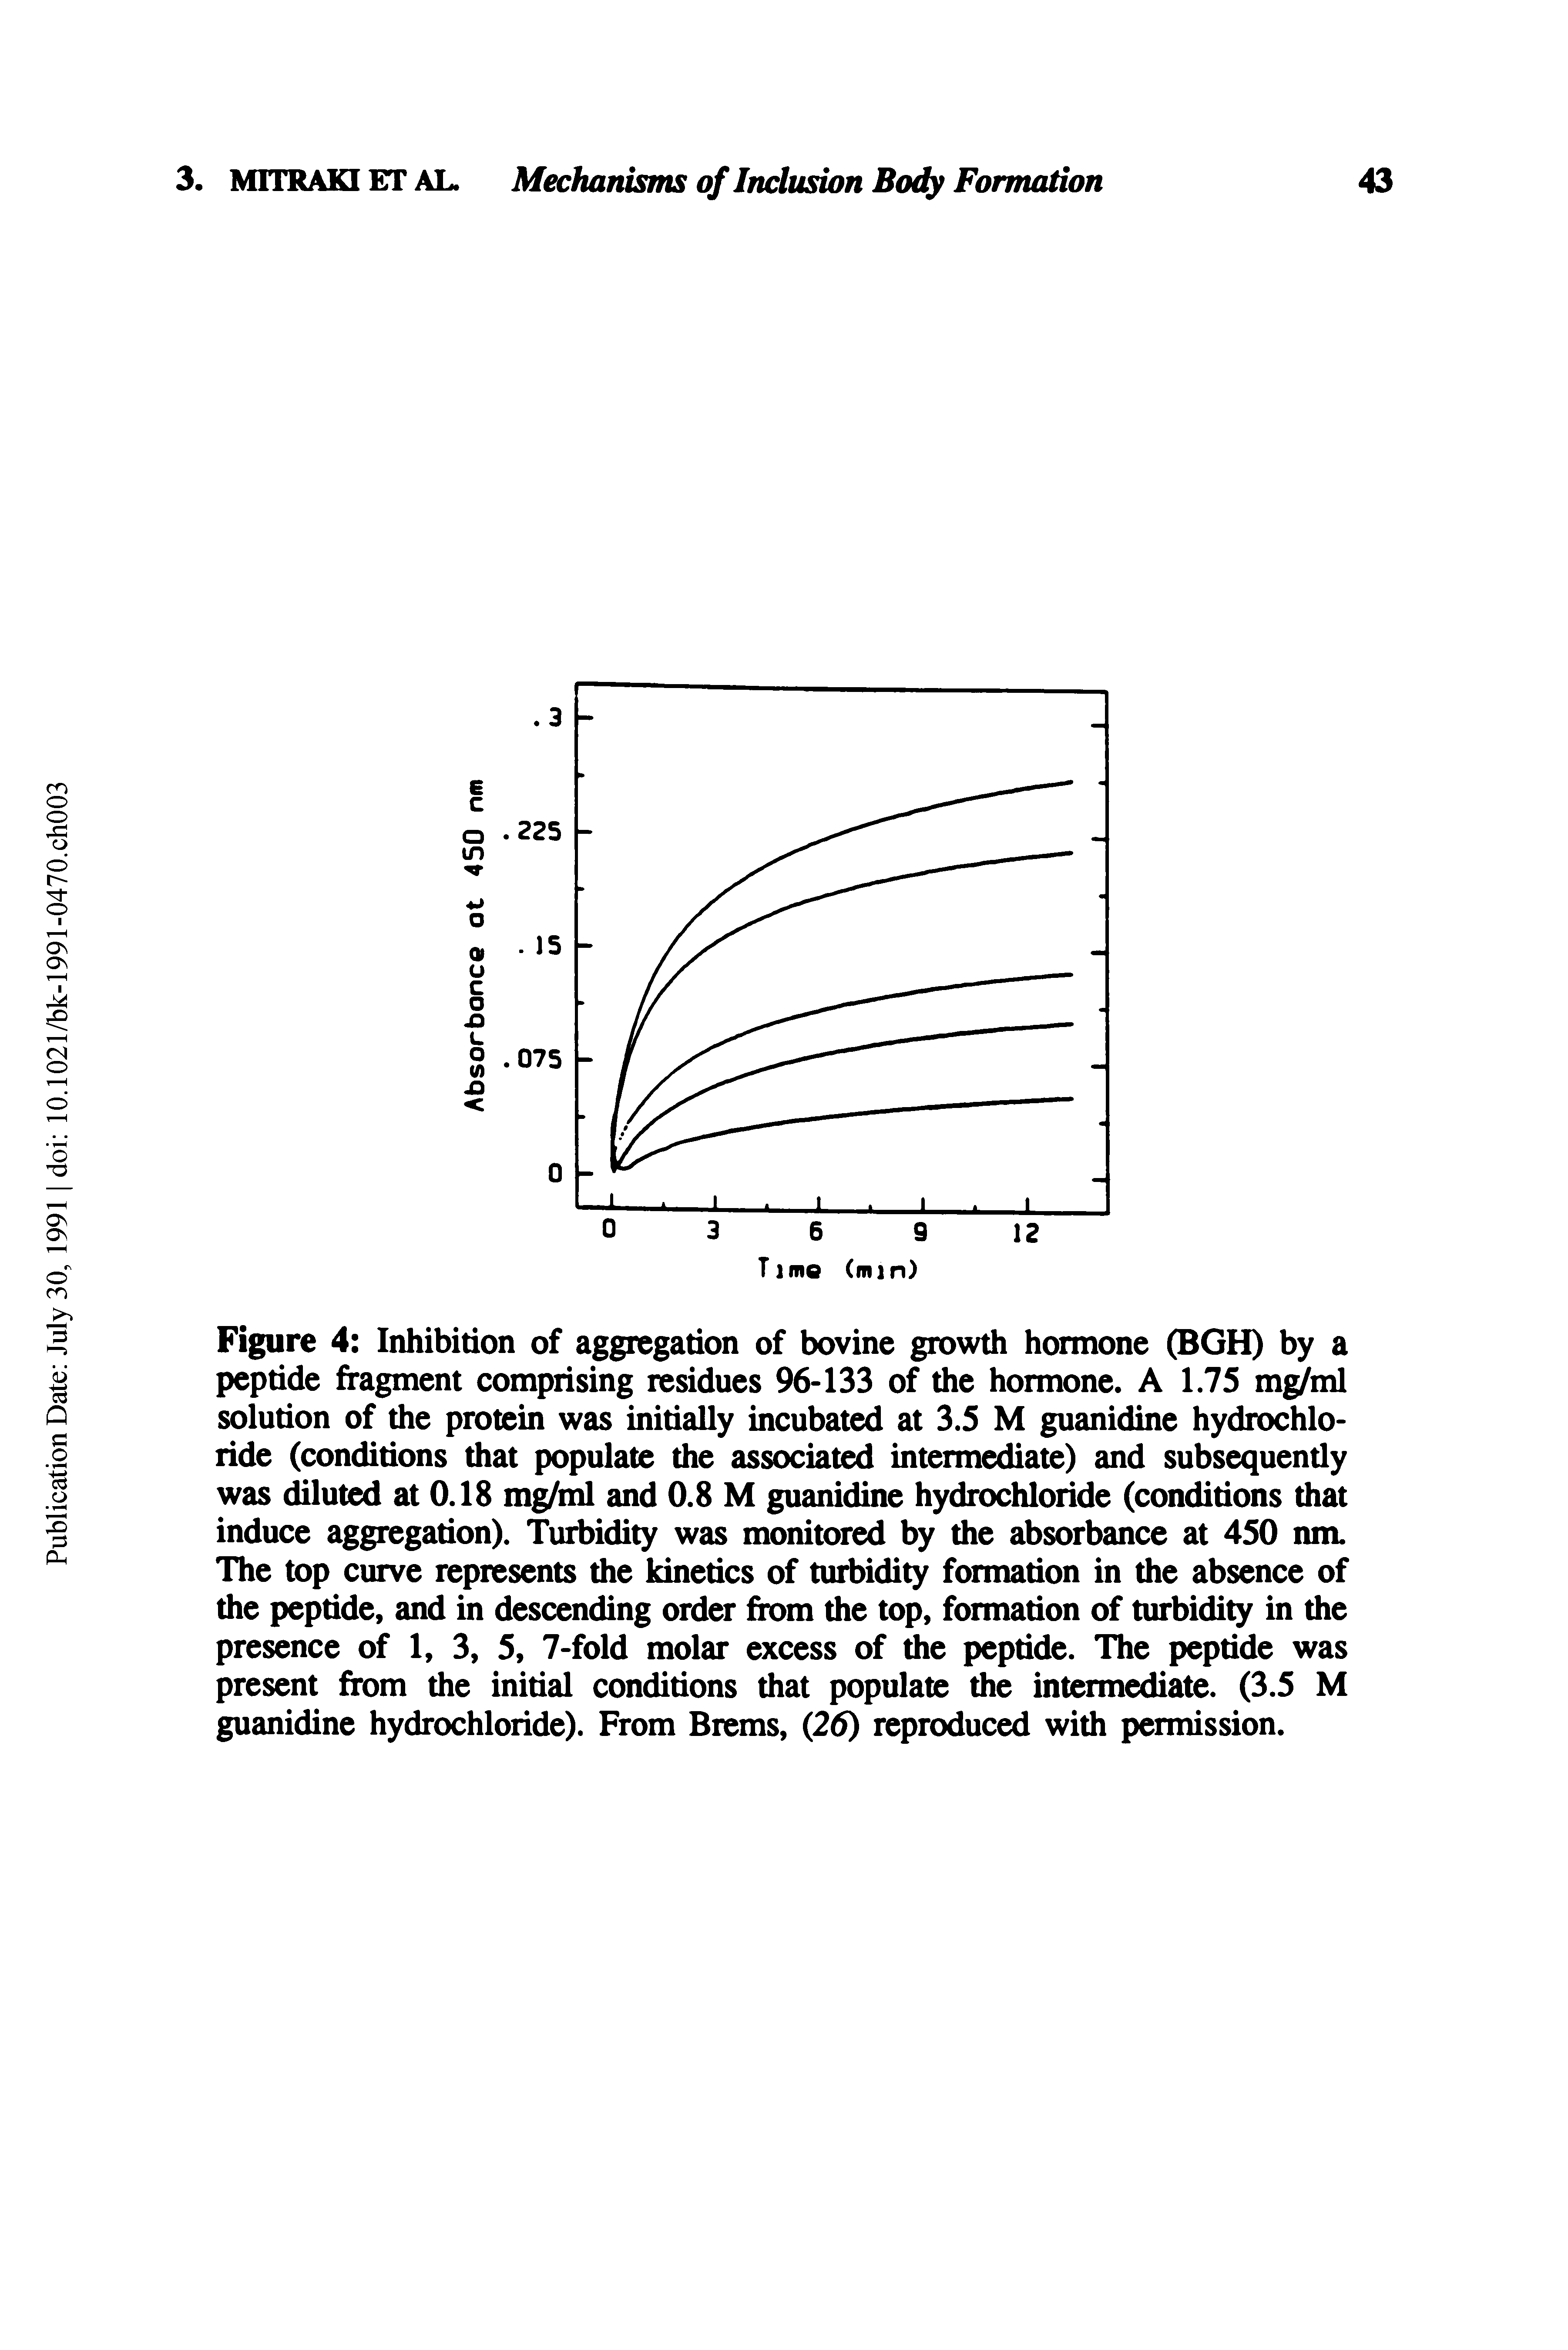 Figure 4 Inhibition of aggregation of bovine growth hormone (BGH) by a peptide fragment comprising residues 96-133 of the hormone. A 1.75 m ml solution of the protein was initially incubated at 3.5 M guanidine hydrochloride (conditions that populate the associated intermediate) and subsequently was diluted at 0.18 m ml and 0.8 M guanidine hydrochloride (conditions that induce aggregation). Turbidity was monitored by the absorbance at 450 nm. The top curve represents the kinetics of turbidity formation in the absence of the peptide, and in descending order from the top, formation of turbidity in the presence of 1, 3, 5, 7-fold molar excess of the peptide. The peptide was present from the initial conditions that populate the intermediate. (3.5 M guanidine hydrochloride). From Brems, (26) reproduced with permission.